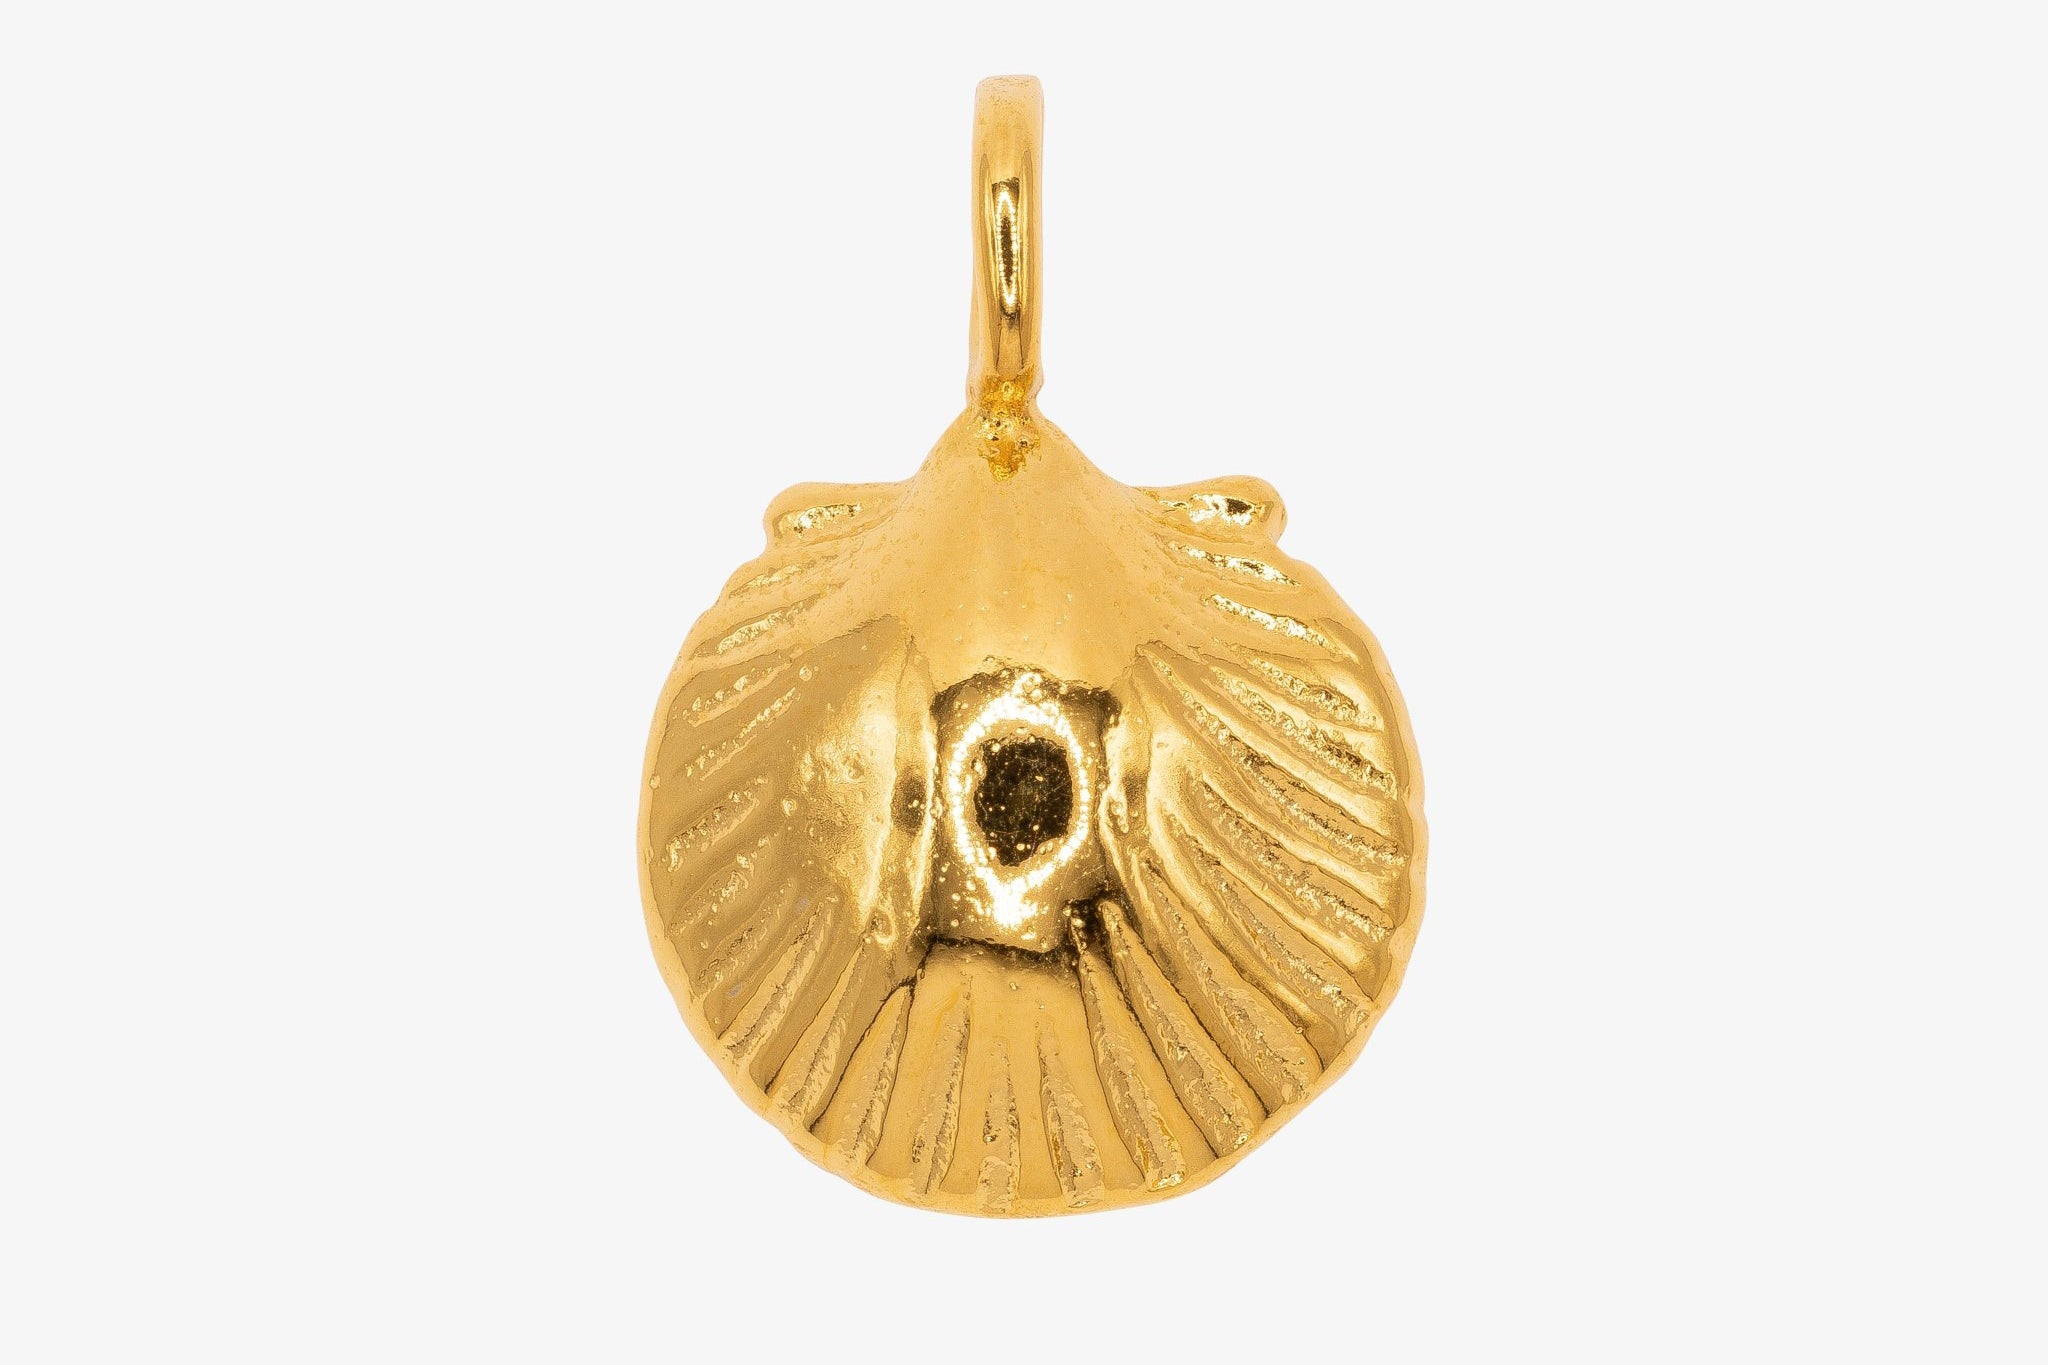 Sea Shell Charm Wholesale 14K Gold, Solid 14K Gold - HarperCrown